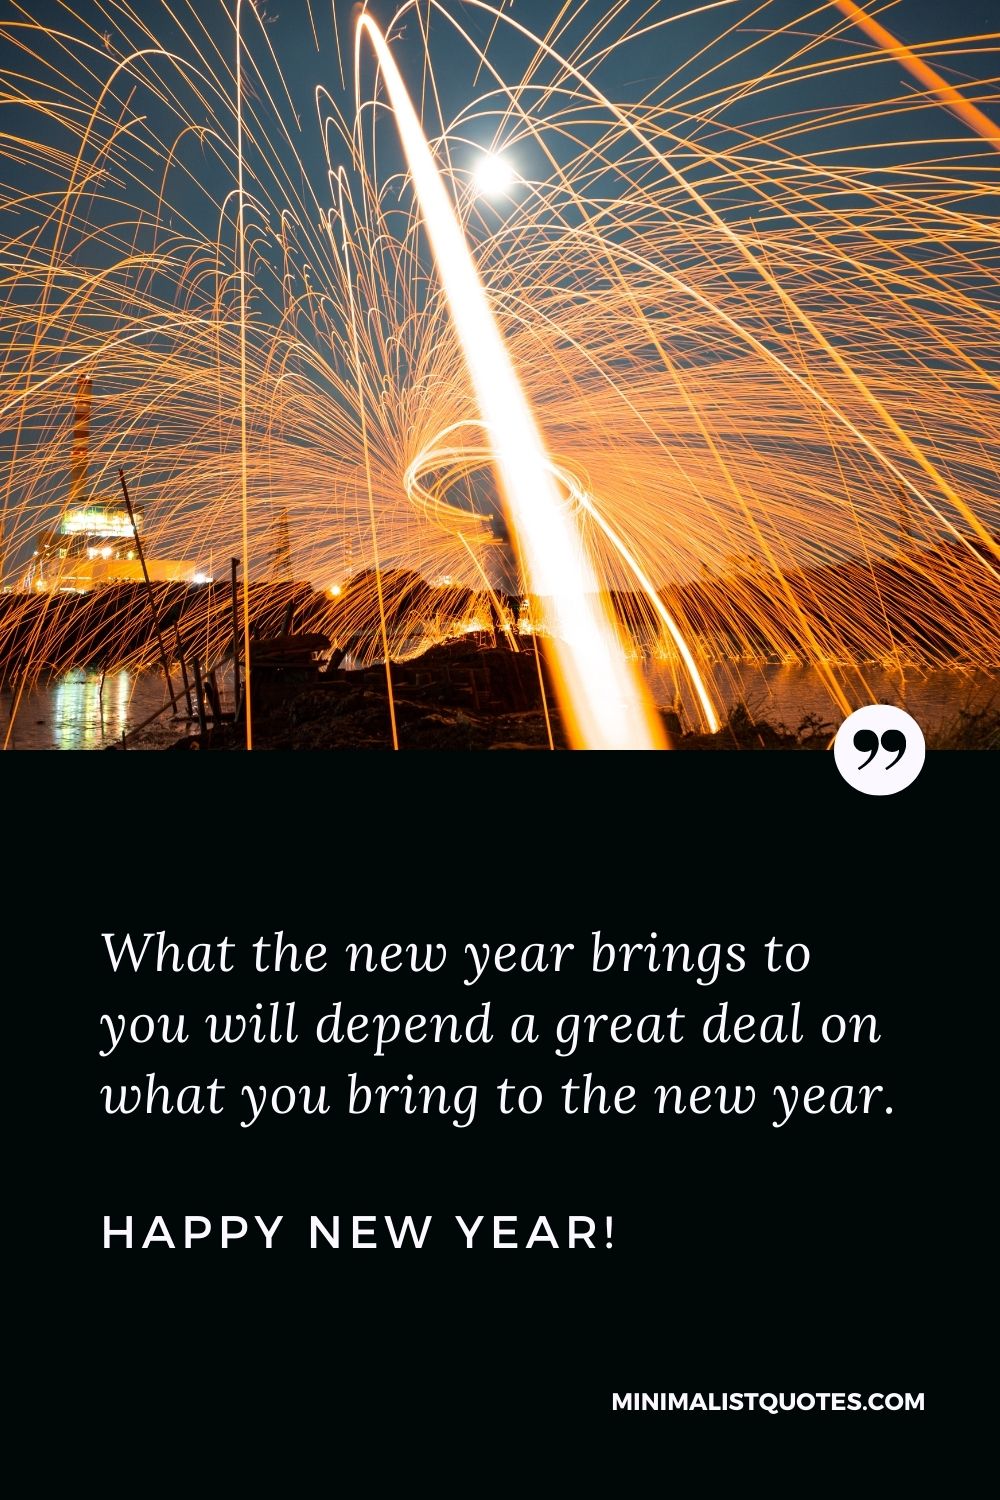 Best happy new year wishes: What the new year brings to you will depend a great deal on what you bring to the new year. Happy New Year!